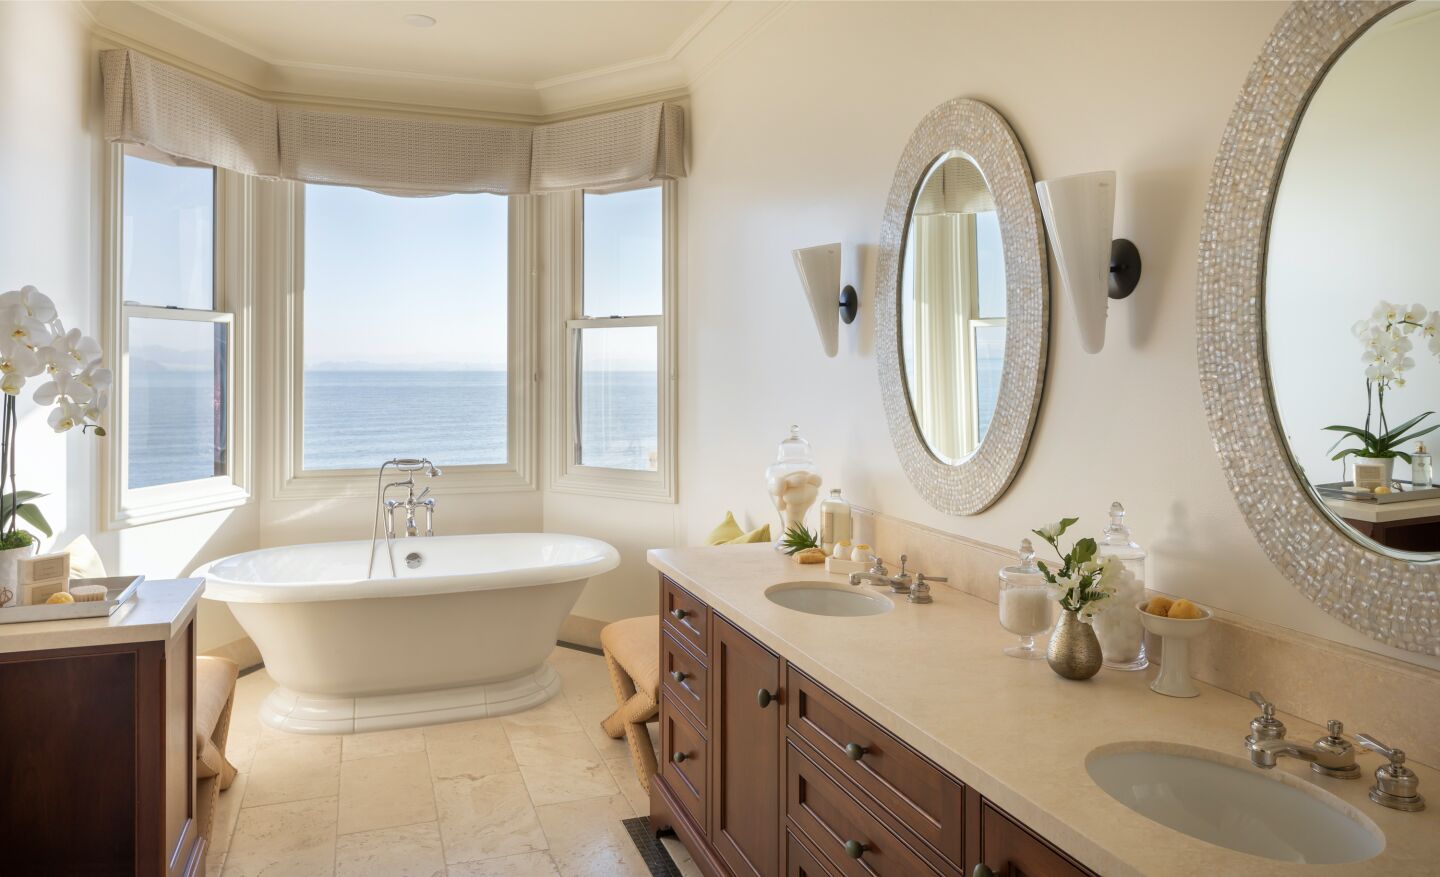 The bathroom with windows overlooking the bay.